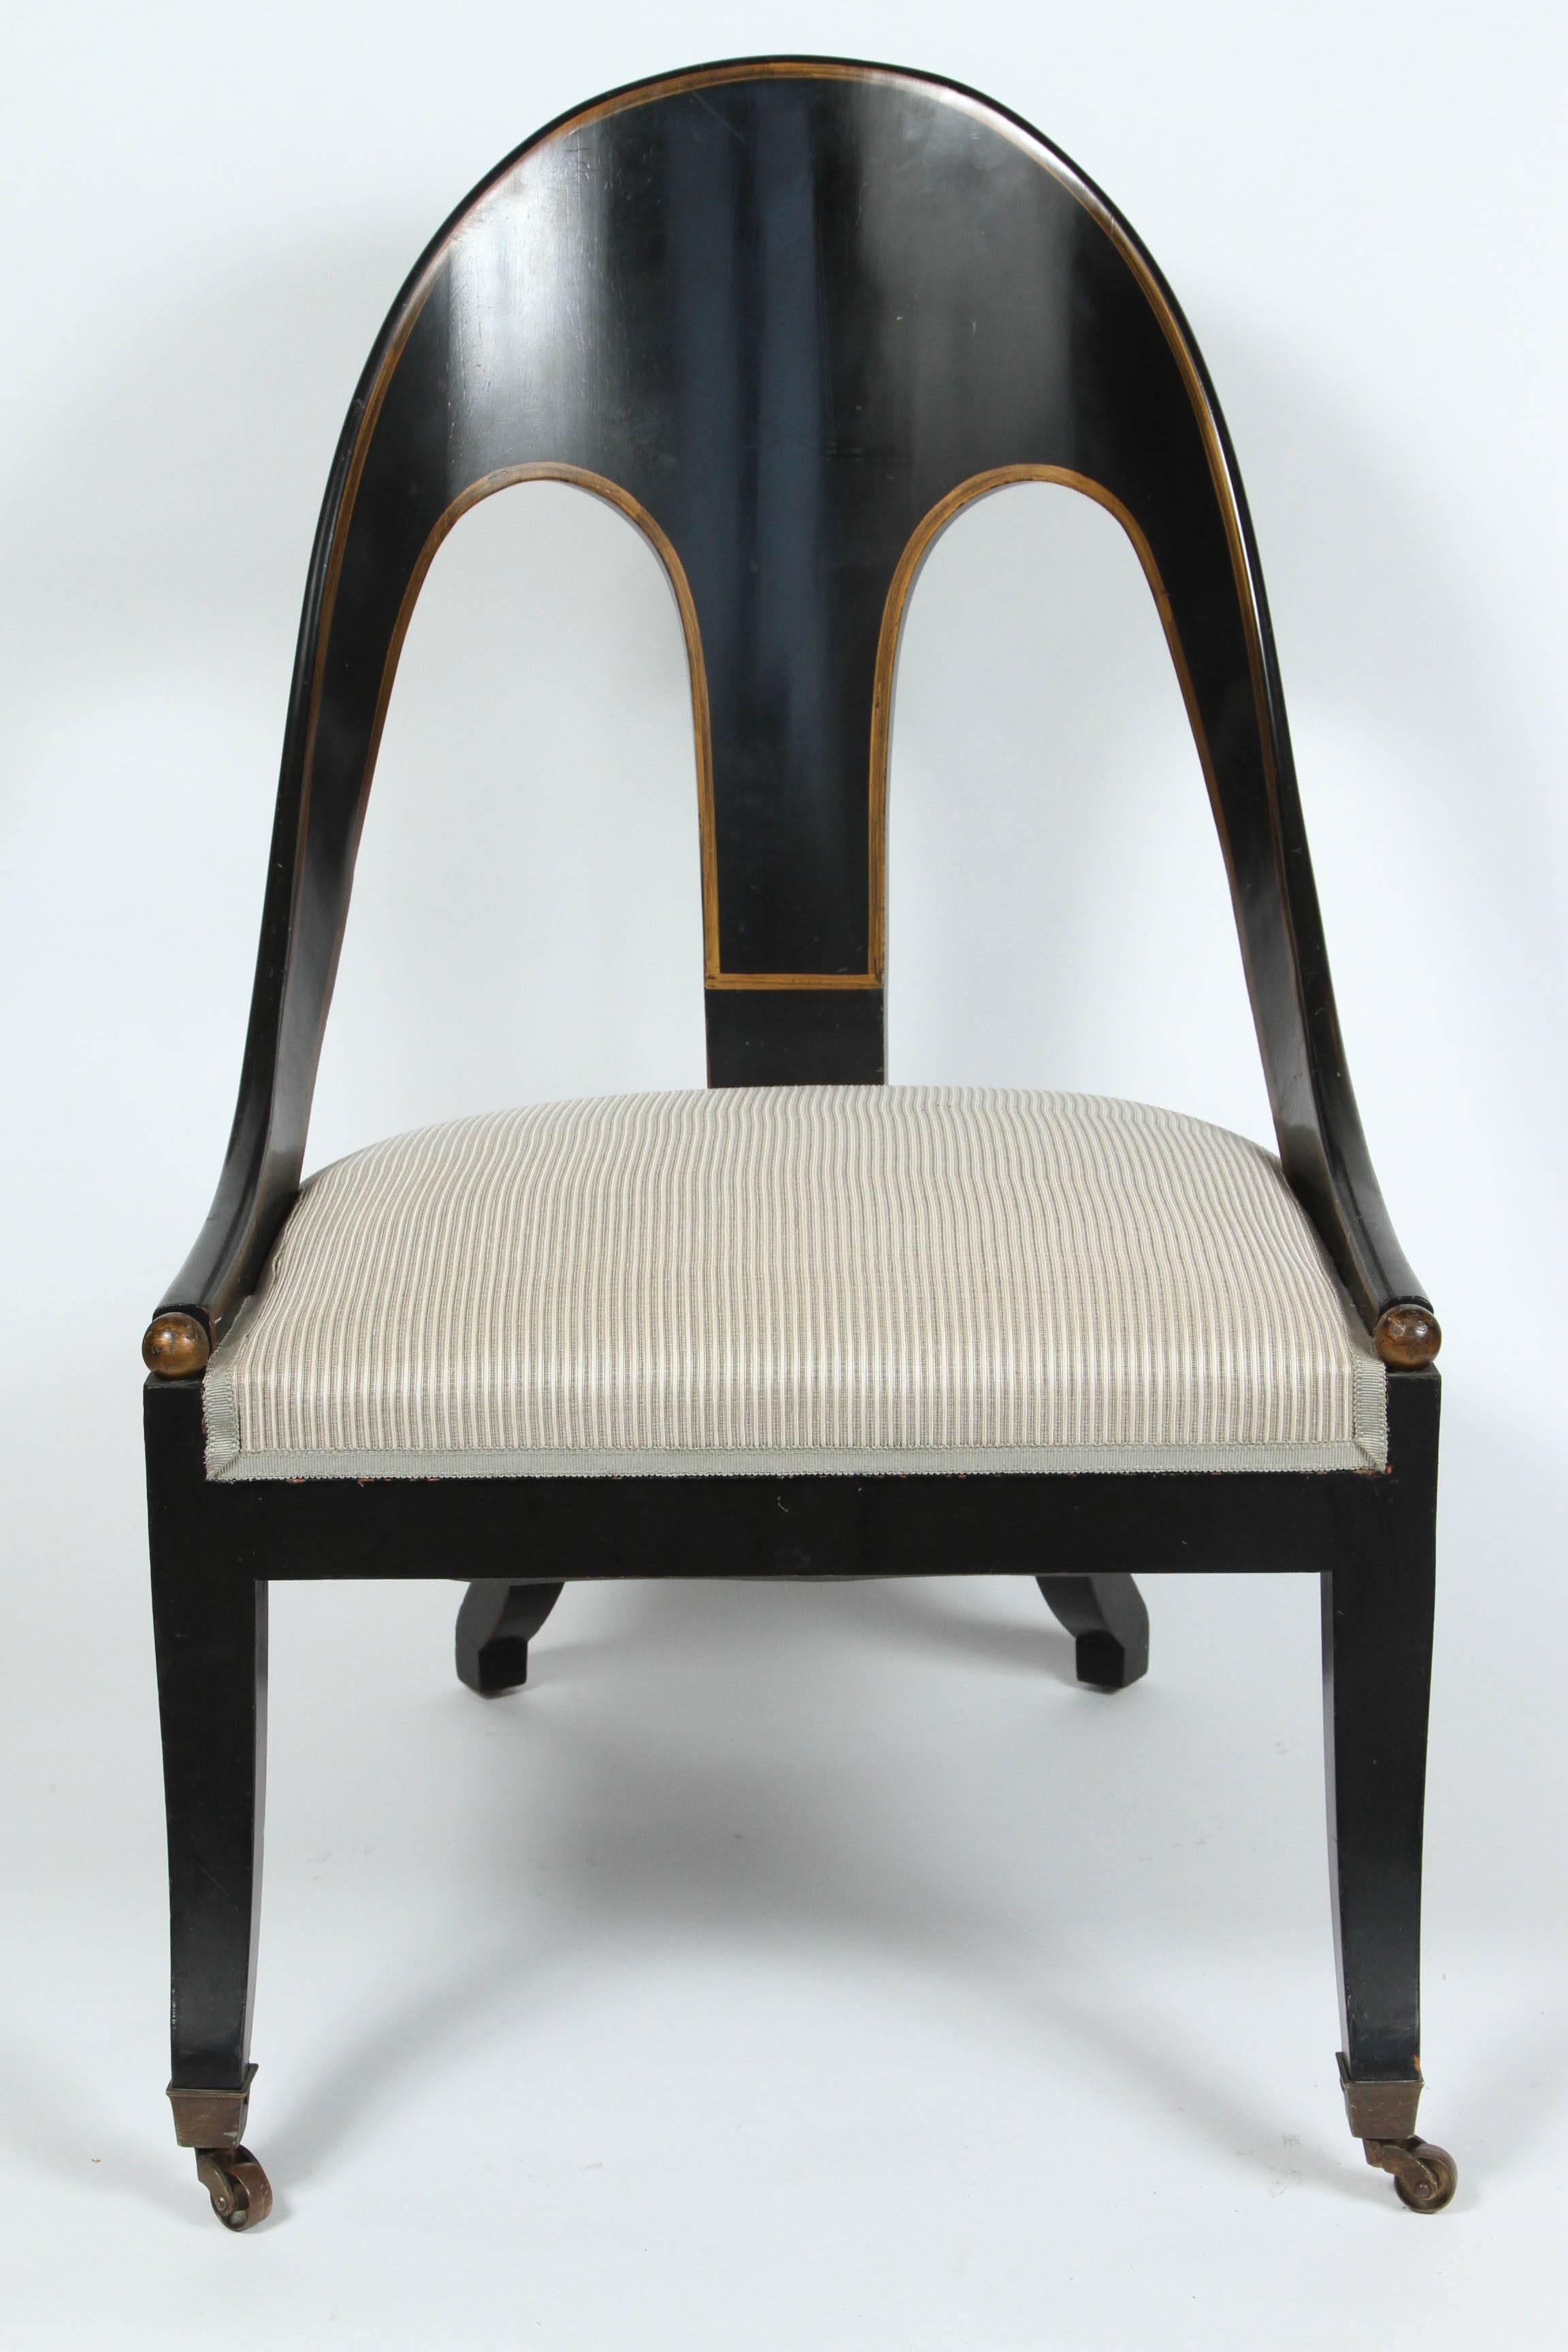 A pair of Regency-style spoon back lounge or slipper chairs, circa 1960. Chairs have a black lacquered finish with gold accents. To the front of the arms and feet, are gold ball finials. The seats are newly reupholstered.